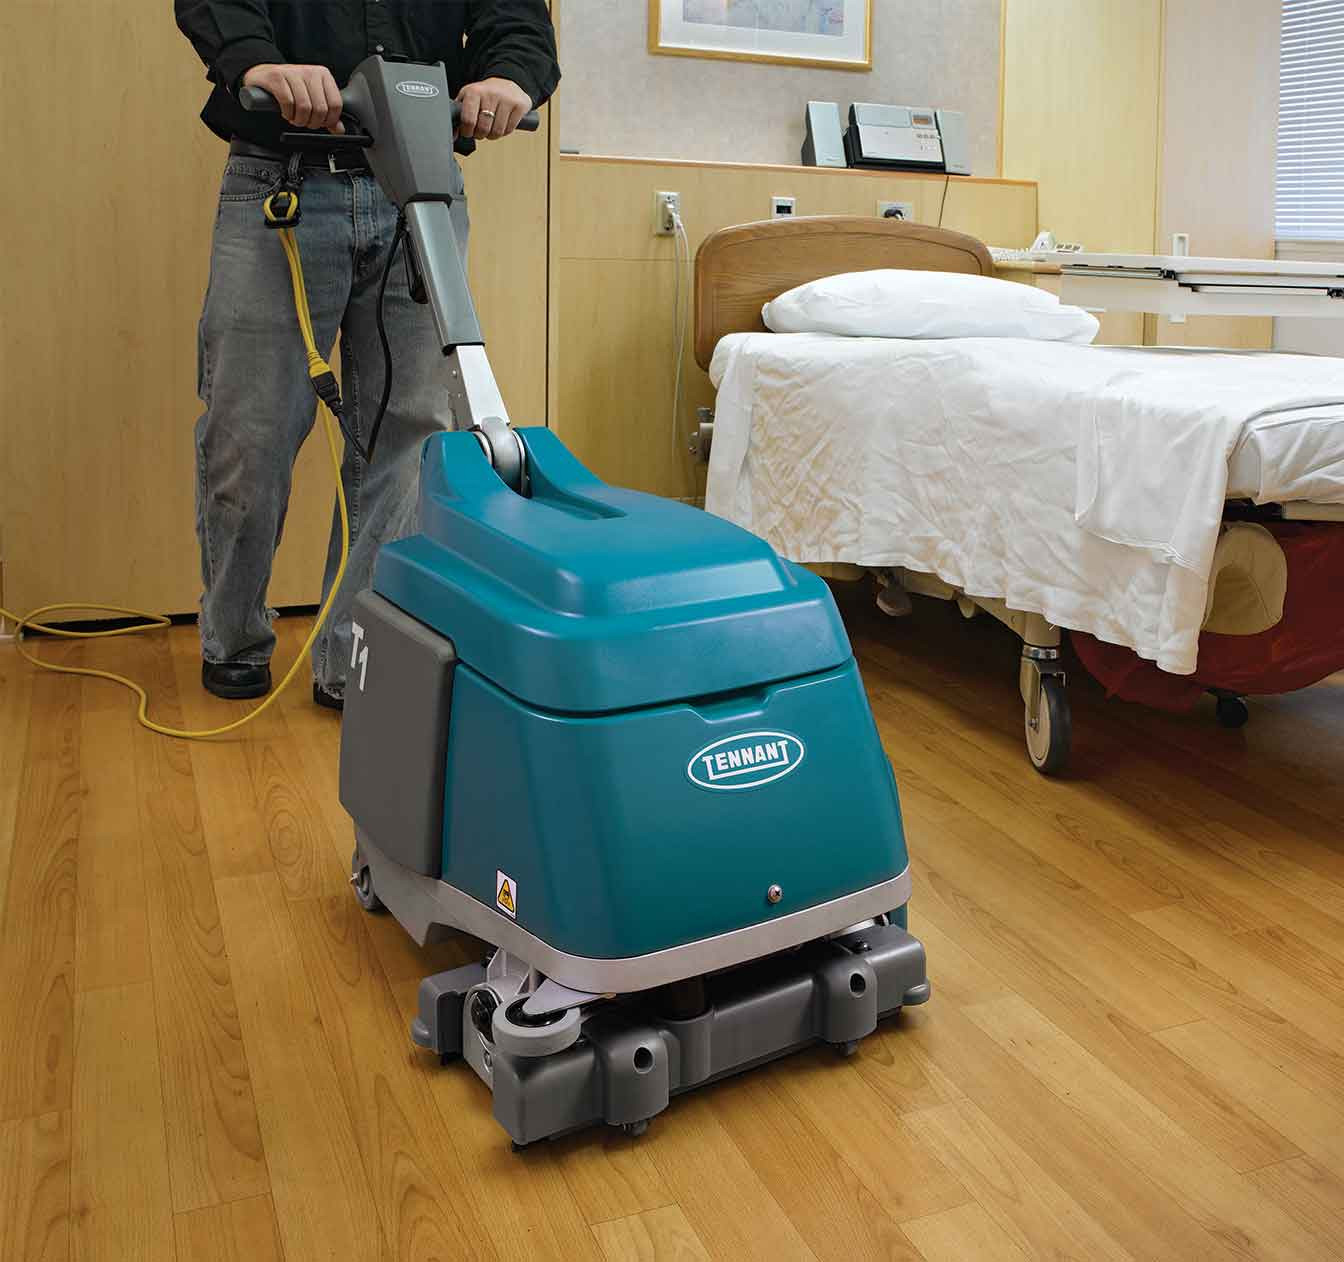 15 Fabulous Hardwood Floor Cleaning Equipment 2024 free download hardwood floor cleaning equipment of t1 walk behind micro scrubber tennant company in the tennant t1 scrubber removes soil using excellent down pressure and pad rpm and it minimizes streaks 